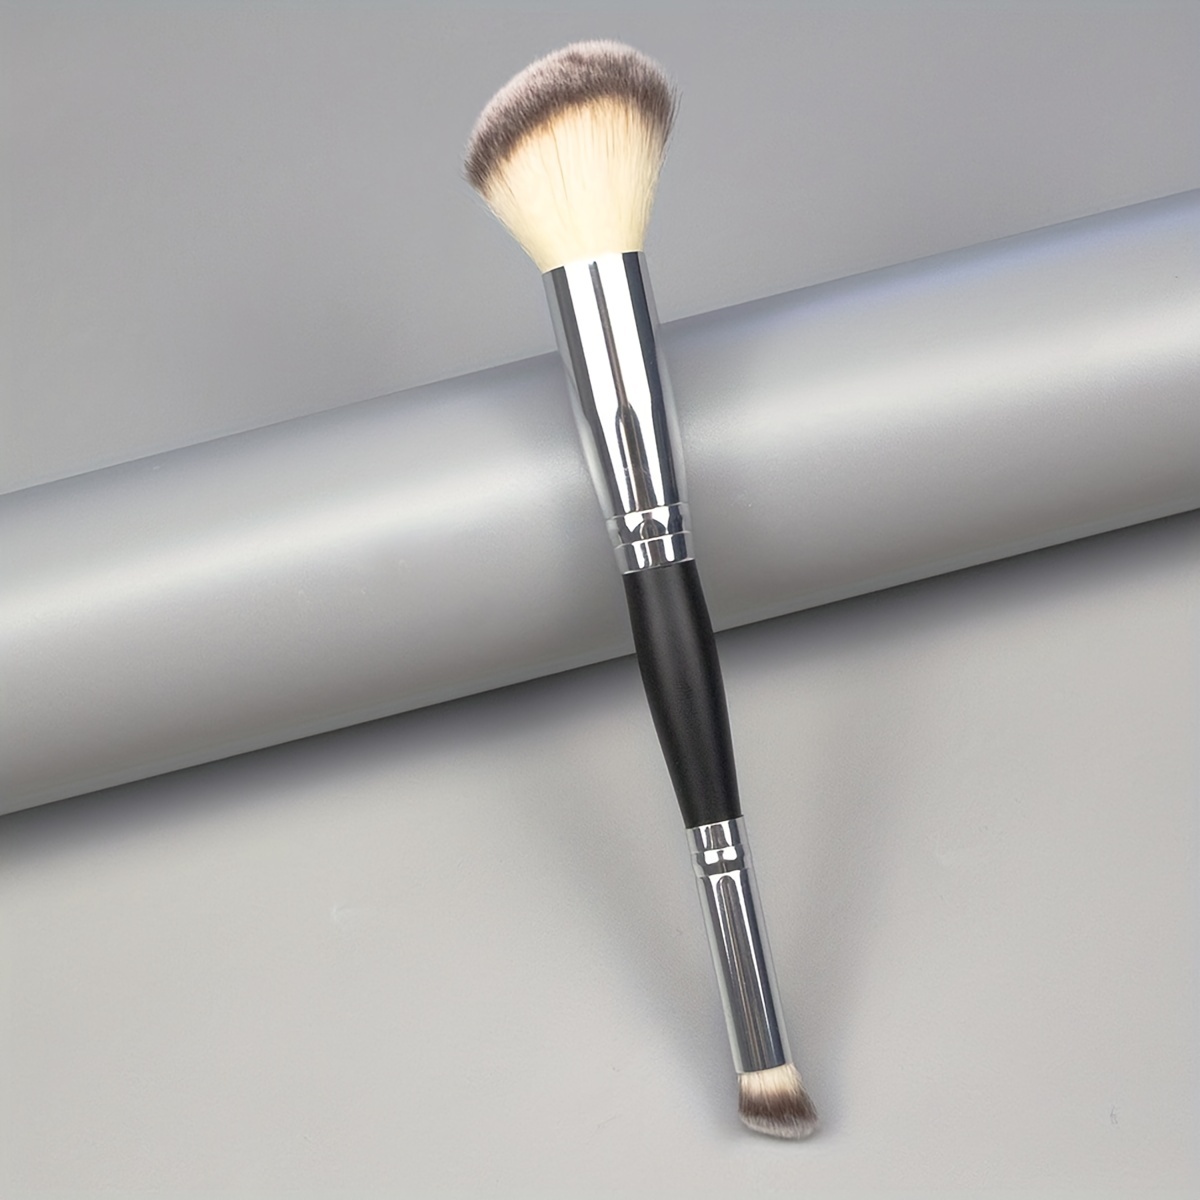 

Dual-ended Angled Contour Brush Nose Shadow Brush Perfect For Any Look Premium Synthetic Flawless Brush Ideal For Liquid, Cream, Powder, Blending, Buffing, Concealer